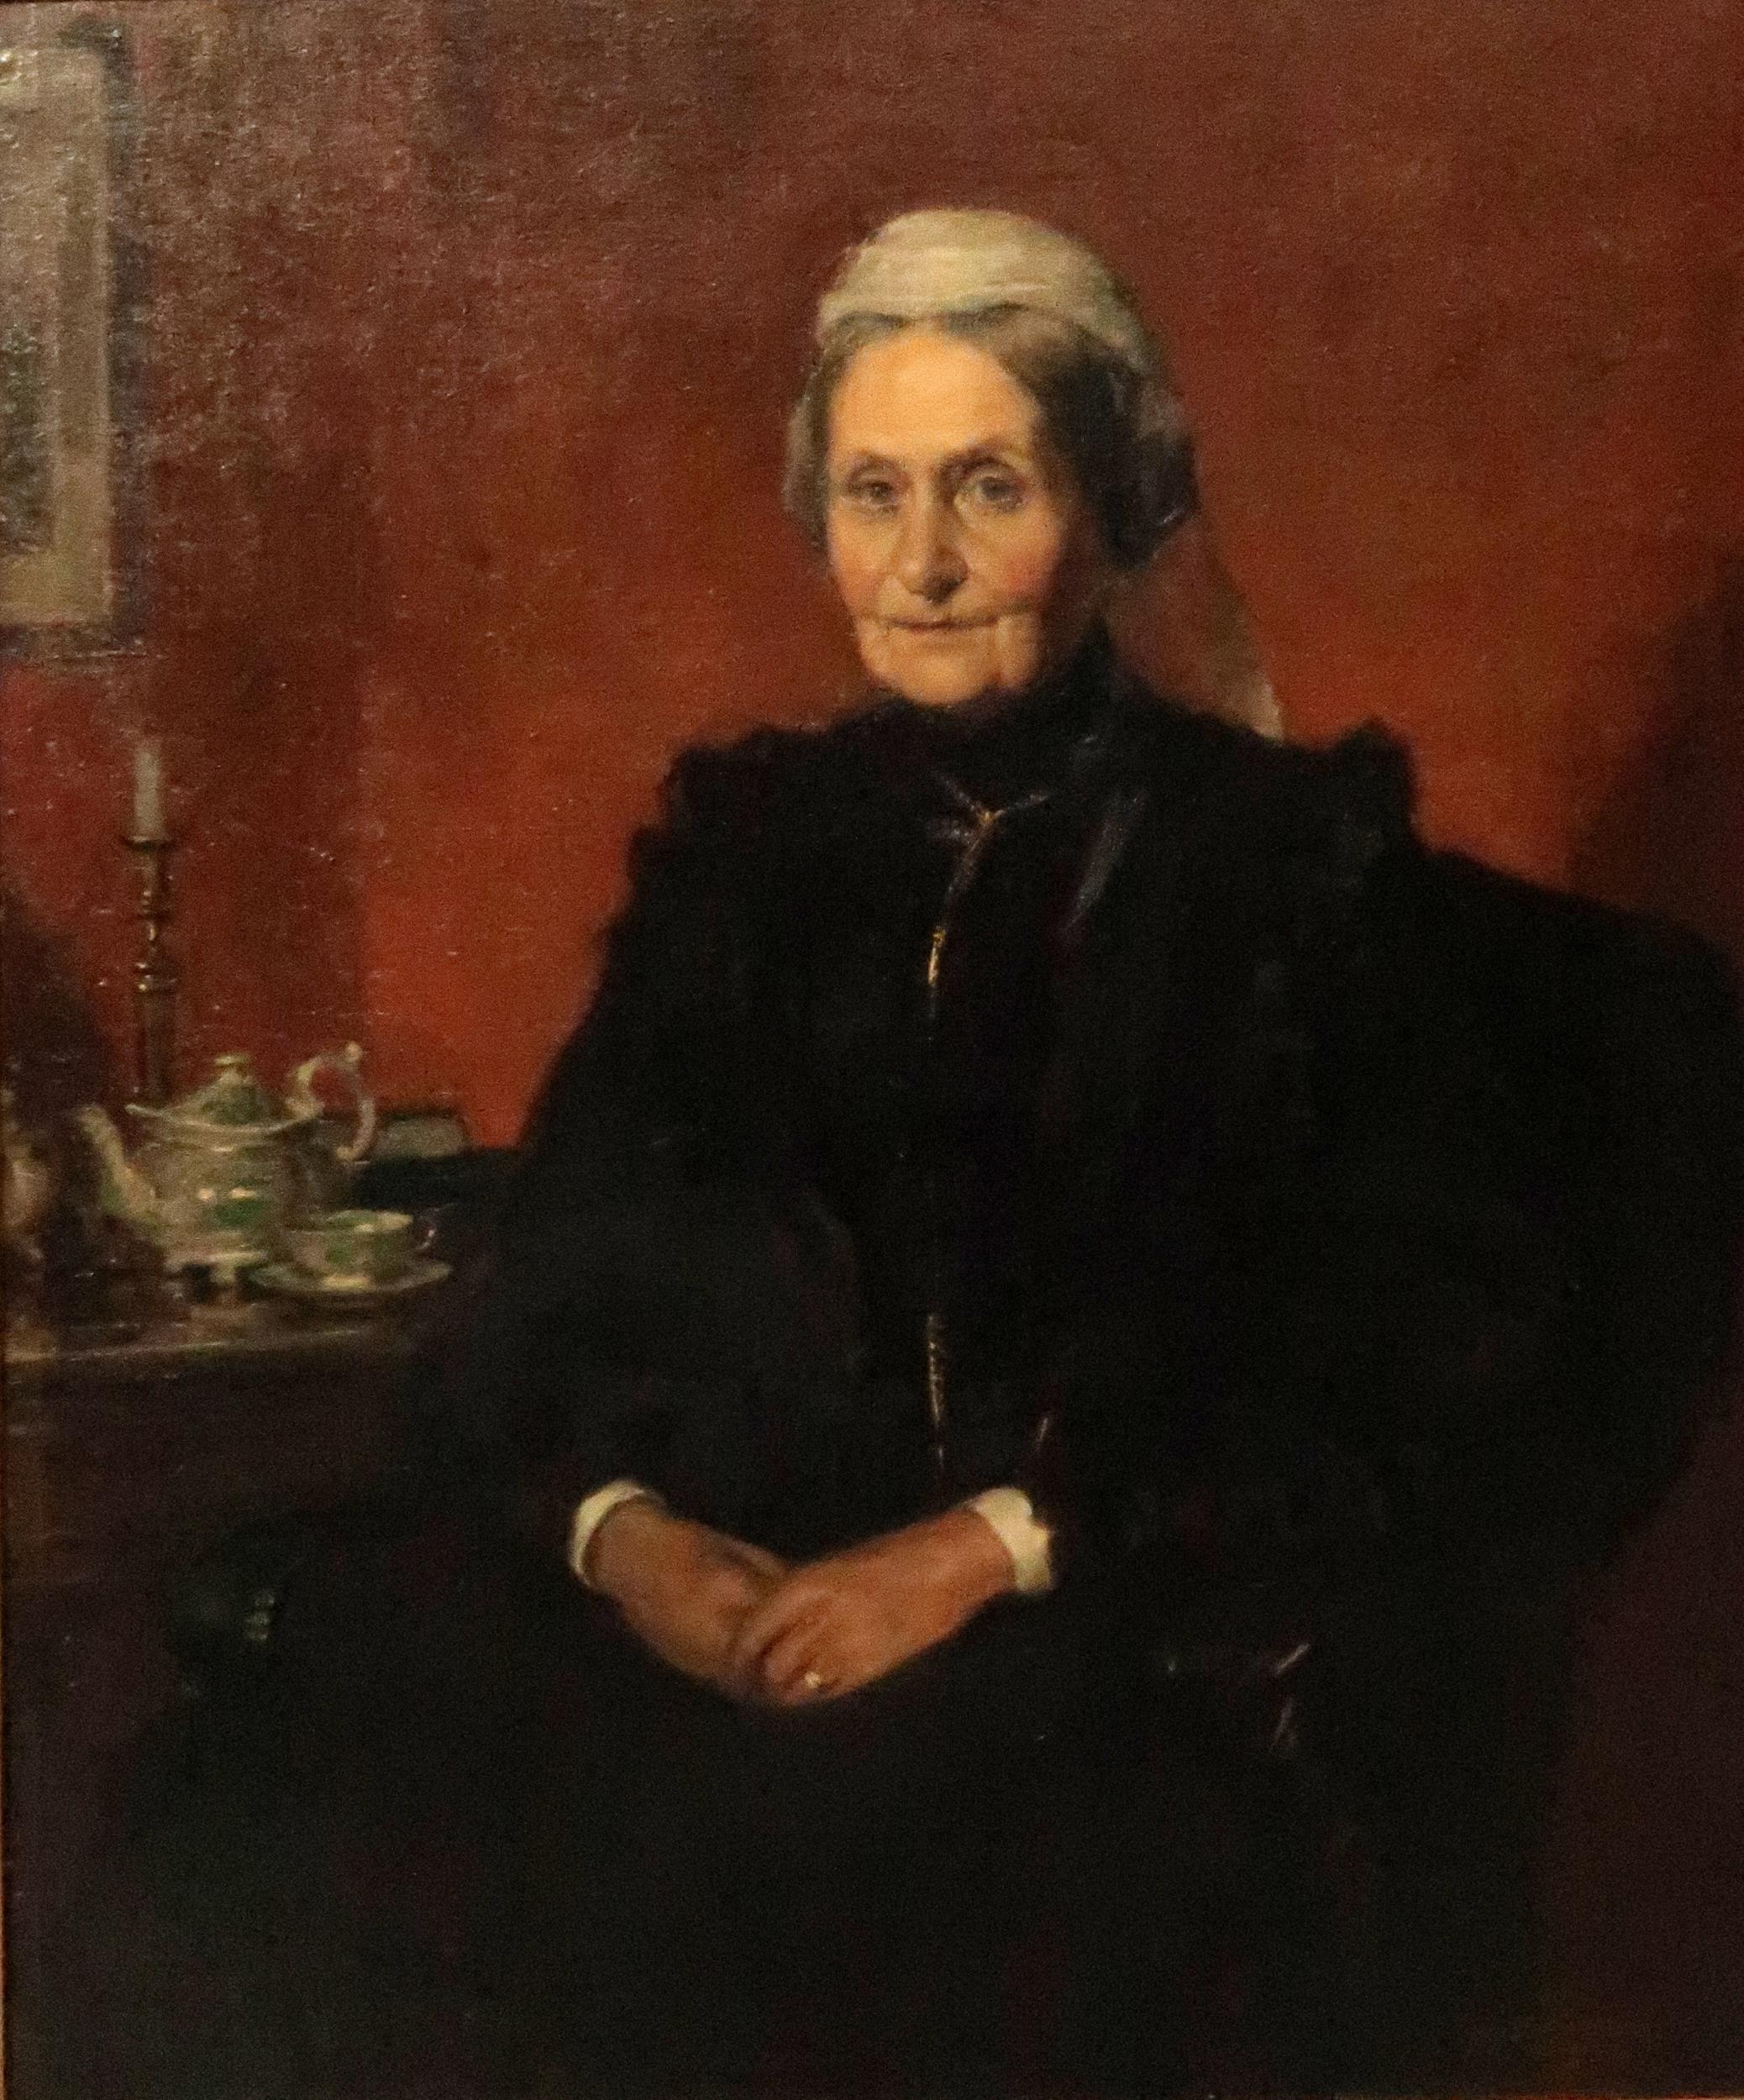 A.P.DIXON Lady seated,three quarter length, portrait, signed, oil on canvas, dated, 1906 60 x 50cm